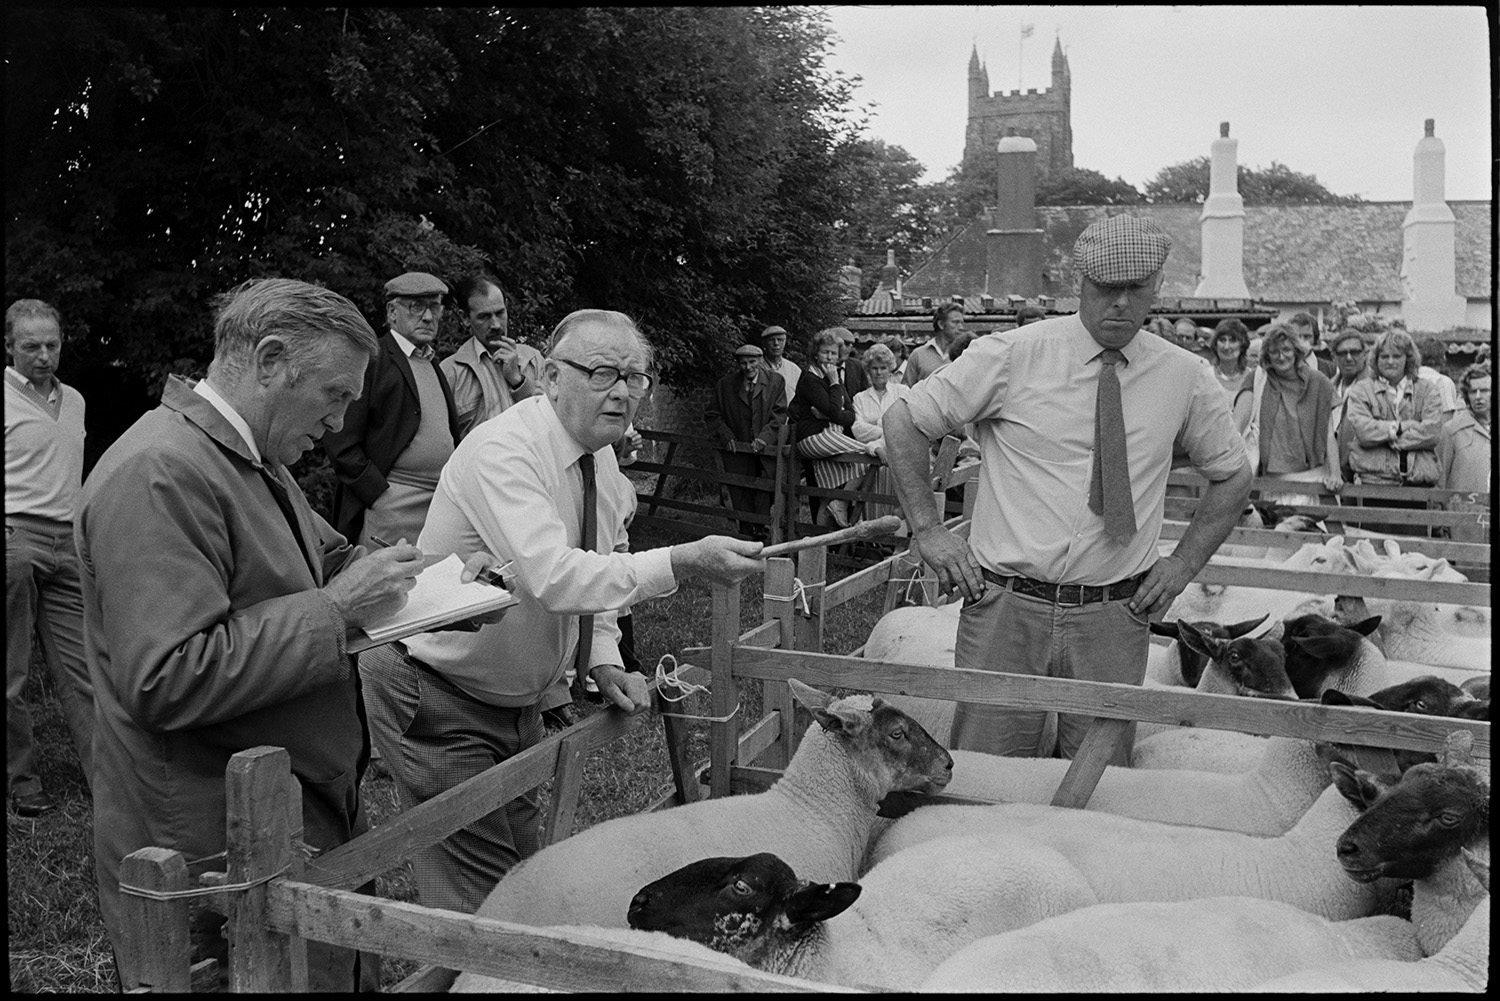 Sheep sale at fair, onlookers and vicar chatting to crowd.
[Men and women gathered around pens of sheep watching an auctioneer and his clerk at a sheep sale at Chulmleigh Fair. Chulmleigh Church tower is visible in the background.]